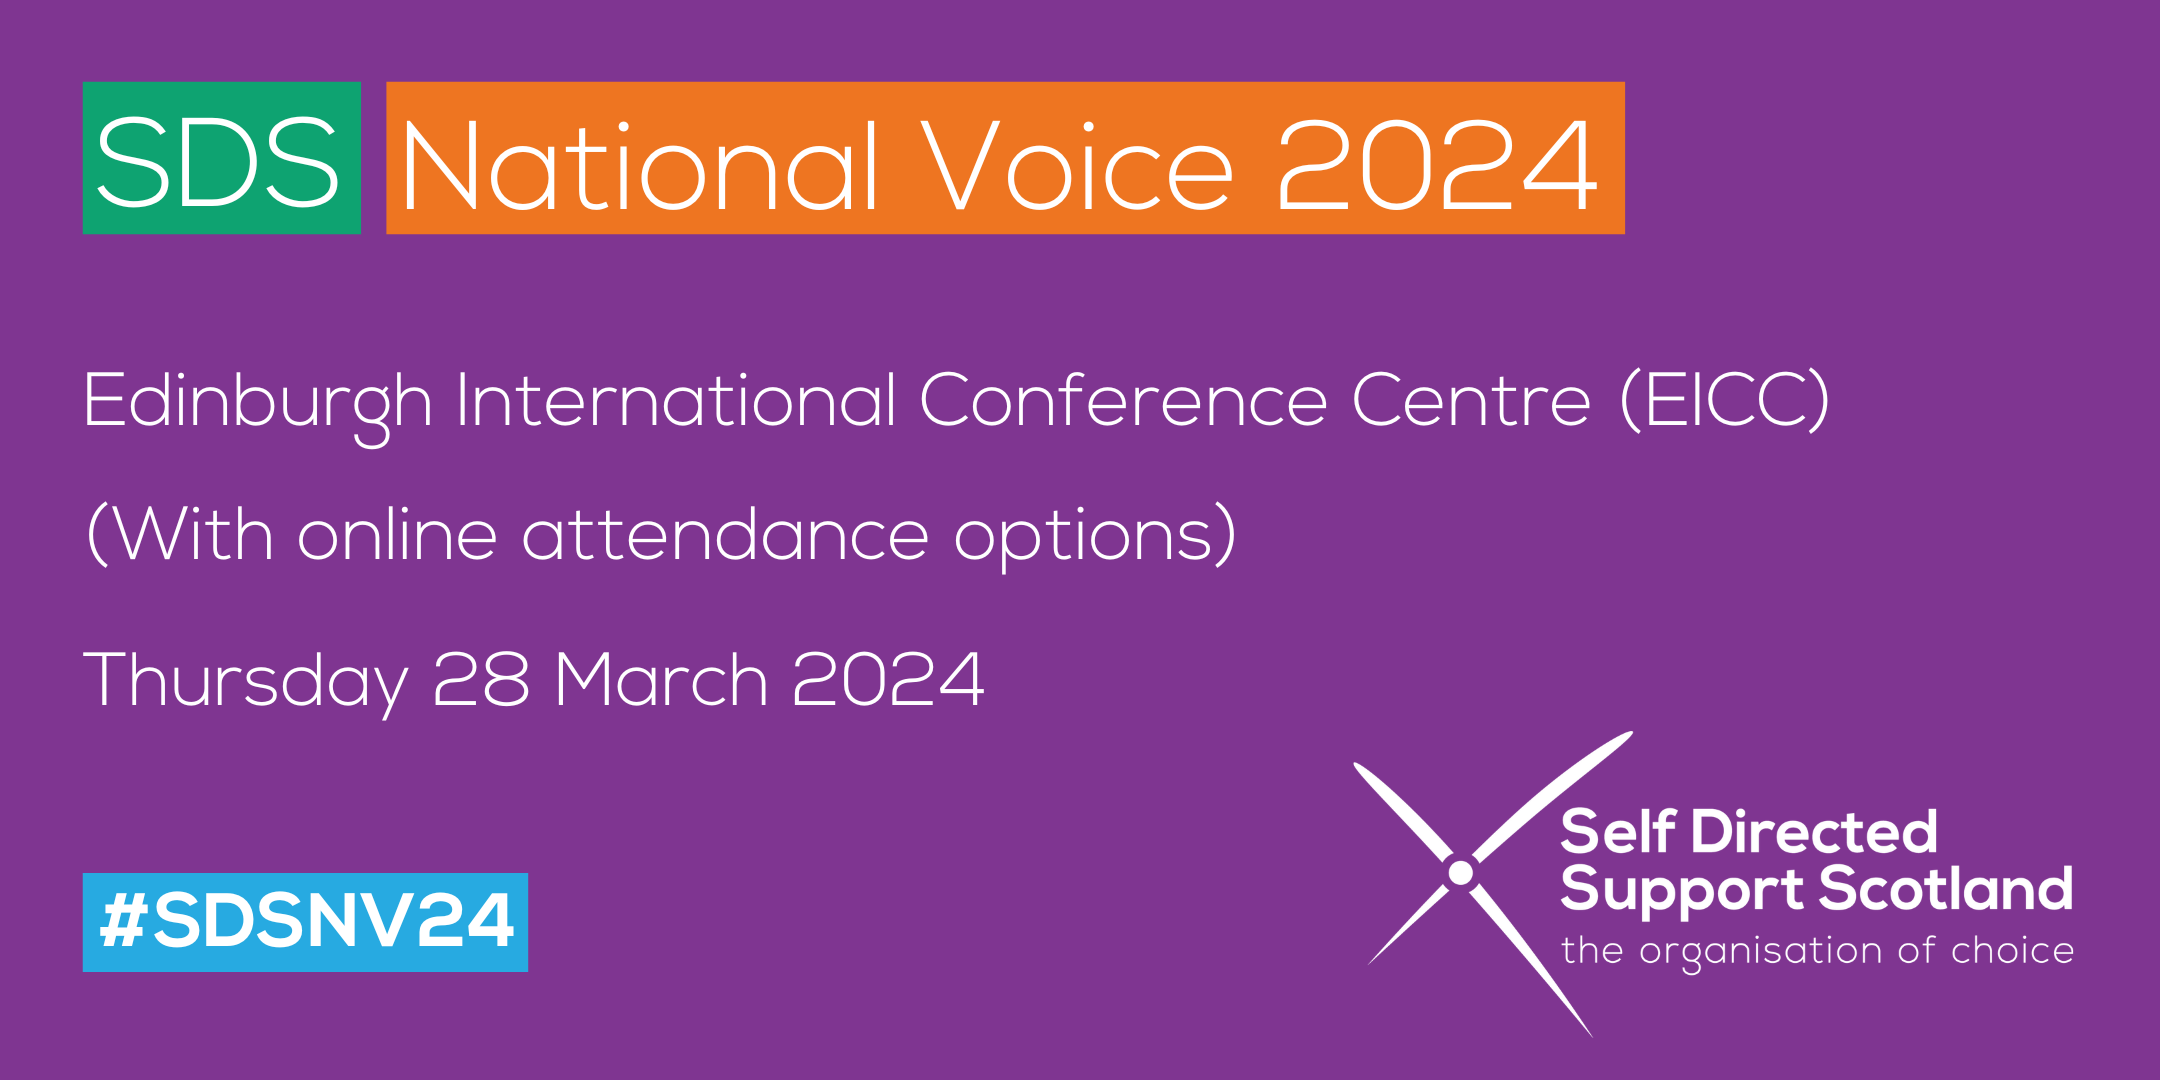 SDS National Voice 2024 Edinburgh International Conference Centre (with online attendance options) Thursday 28 March 2024